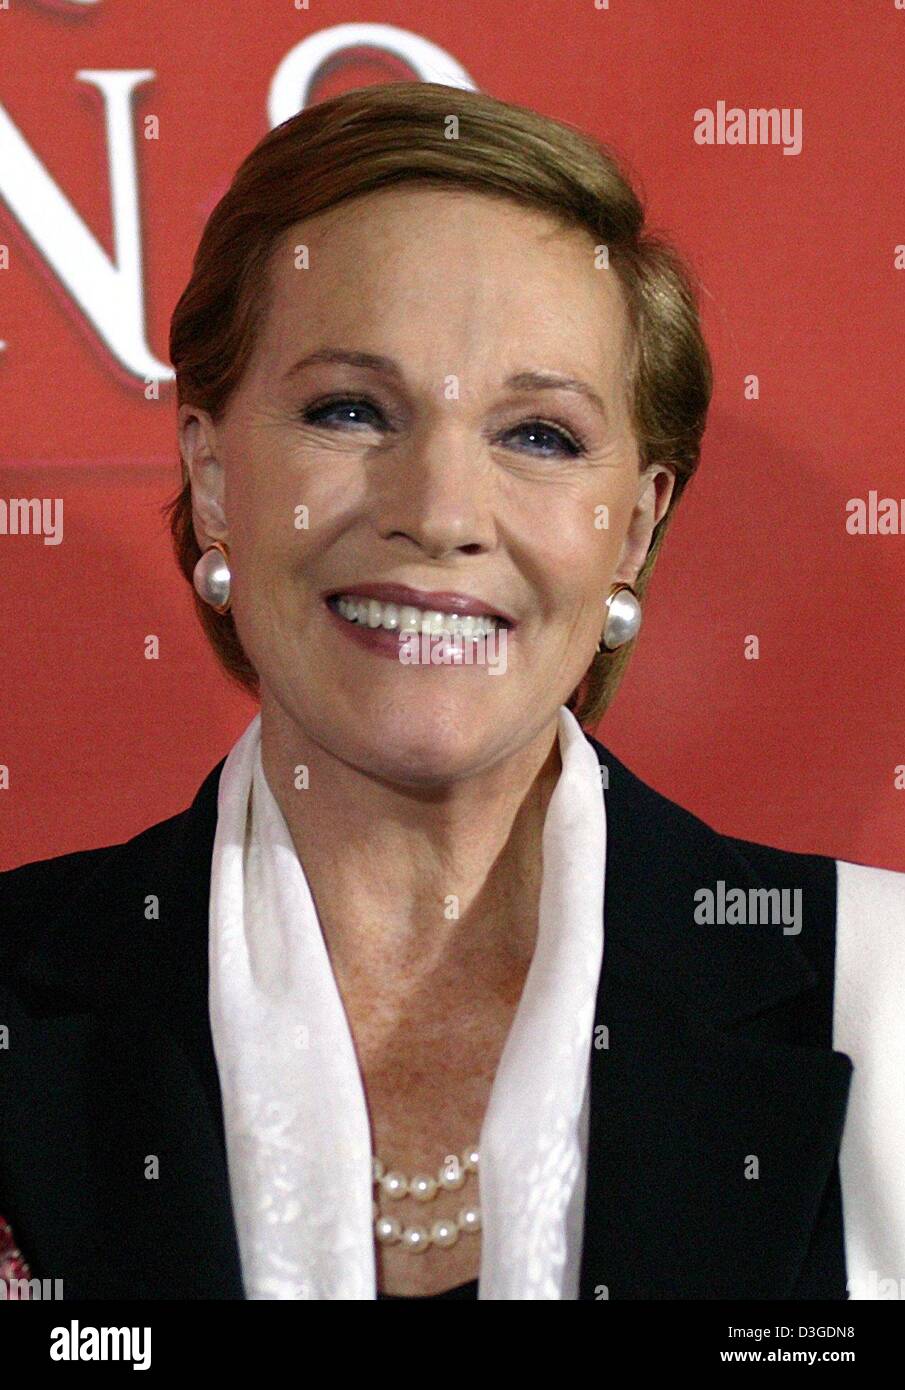 (dpa) - Actress Dame Julie Andrews smiles during the presentation of her new movie 'The Princess Diaries 2: Royal Engagement' in Munich, Germany, 22 September 2004. The romantic comedy will start nationwide in Germany on 23 September 2004. Stock Photo